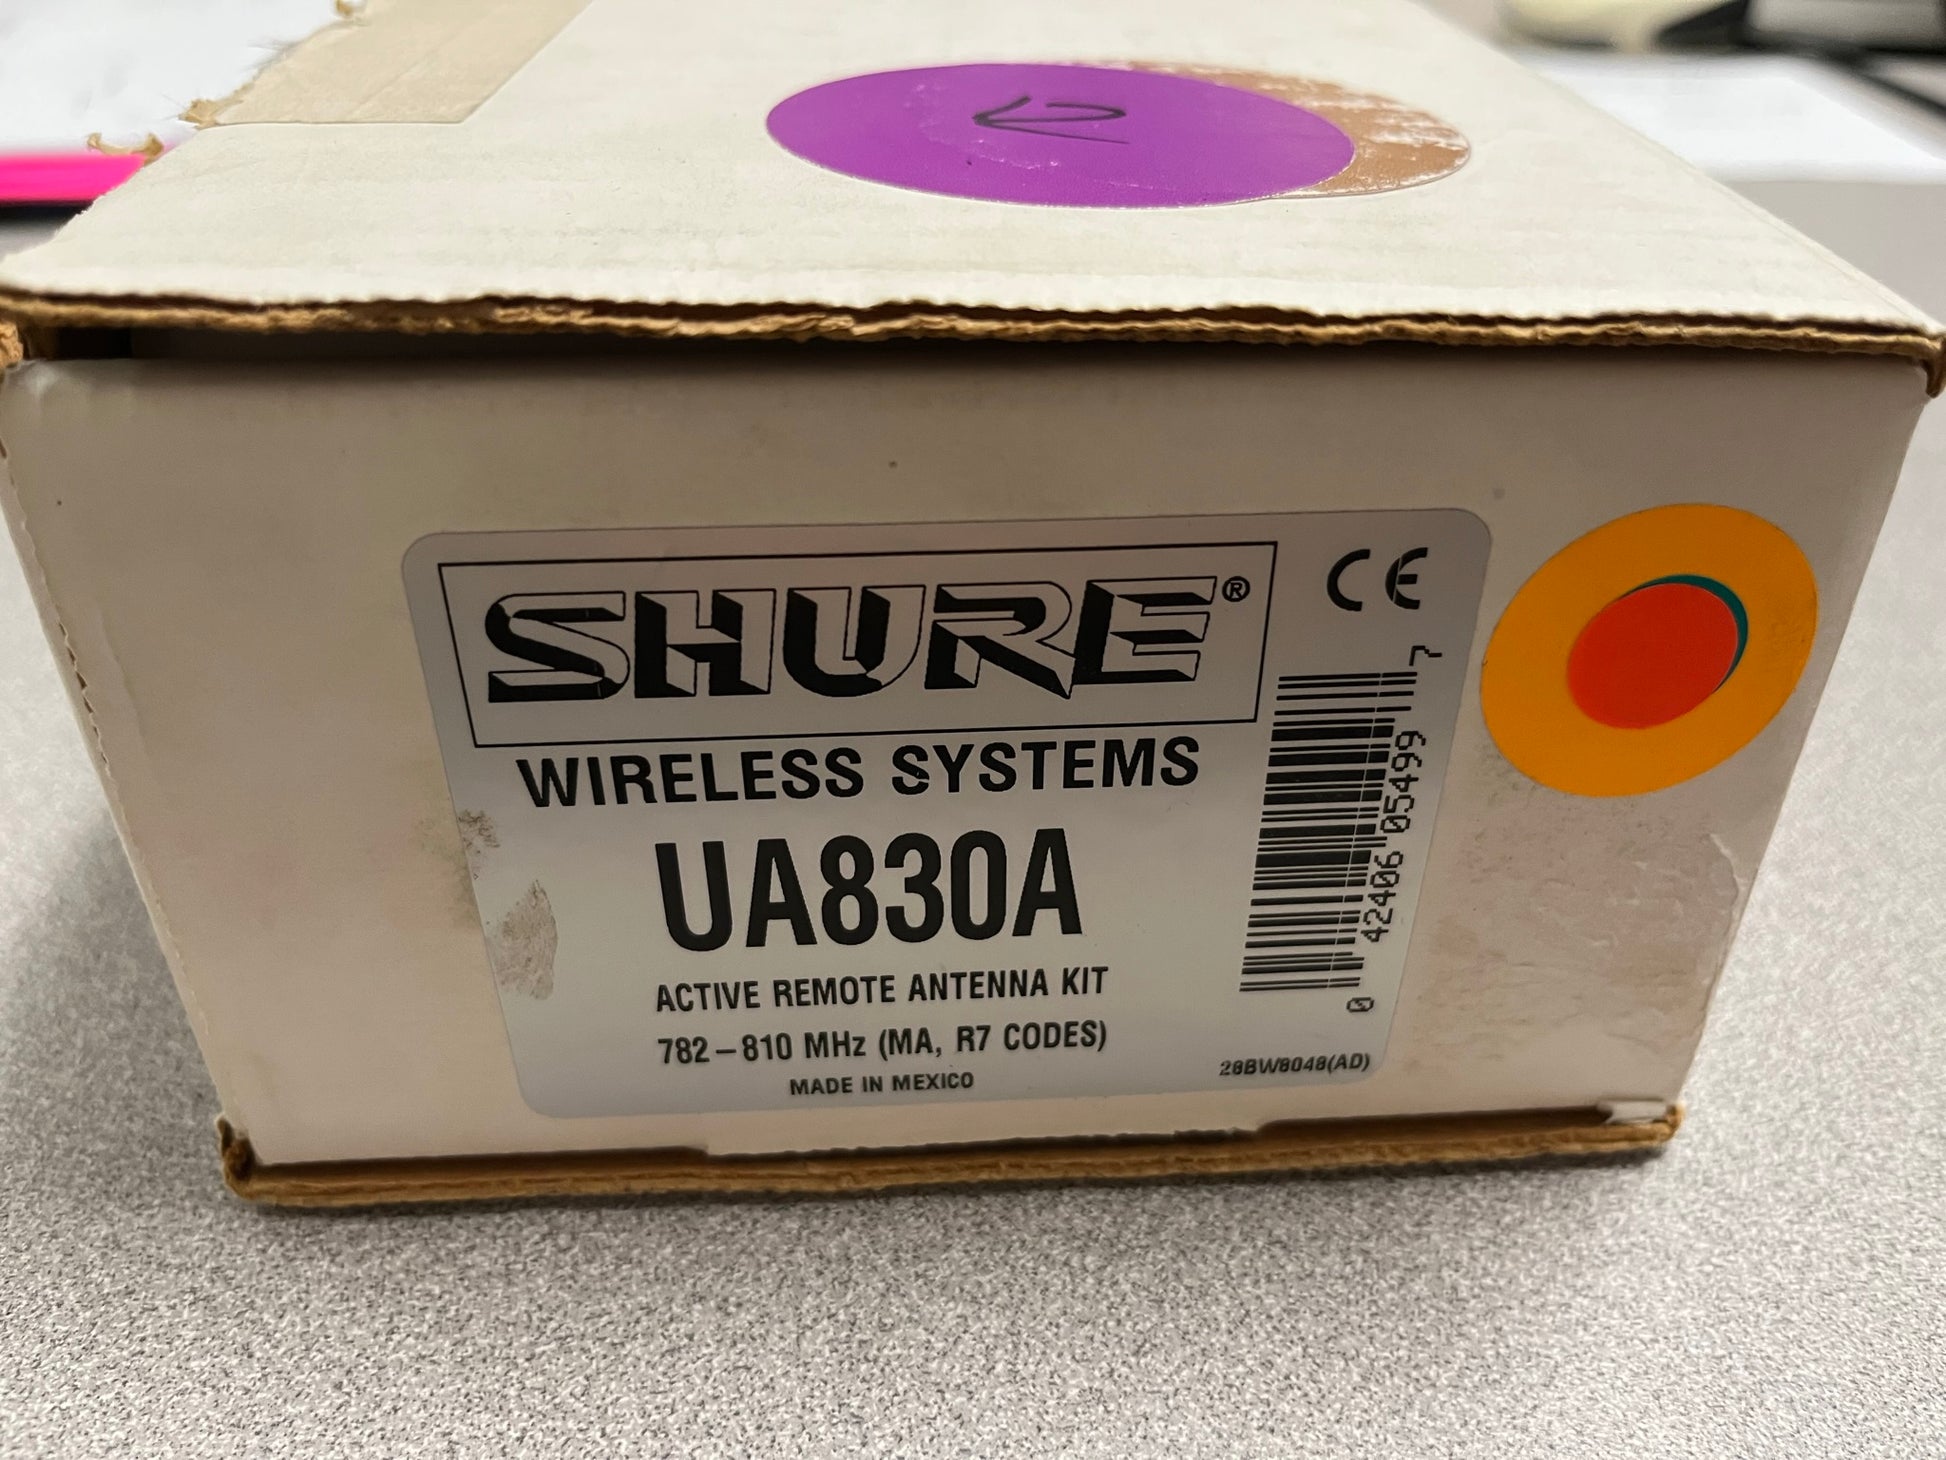 Shure UA830A UHF Active Remote Antenna Kit 782-810MHz, NIB. We Sell Professional Audio Equipment. Audio Systems, Amplifiers, Consoles, Mixers, Electronics, Entertainment, Sound, Live.